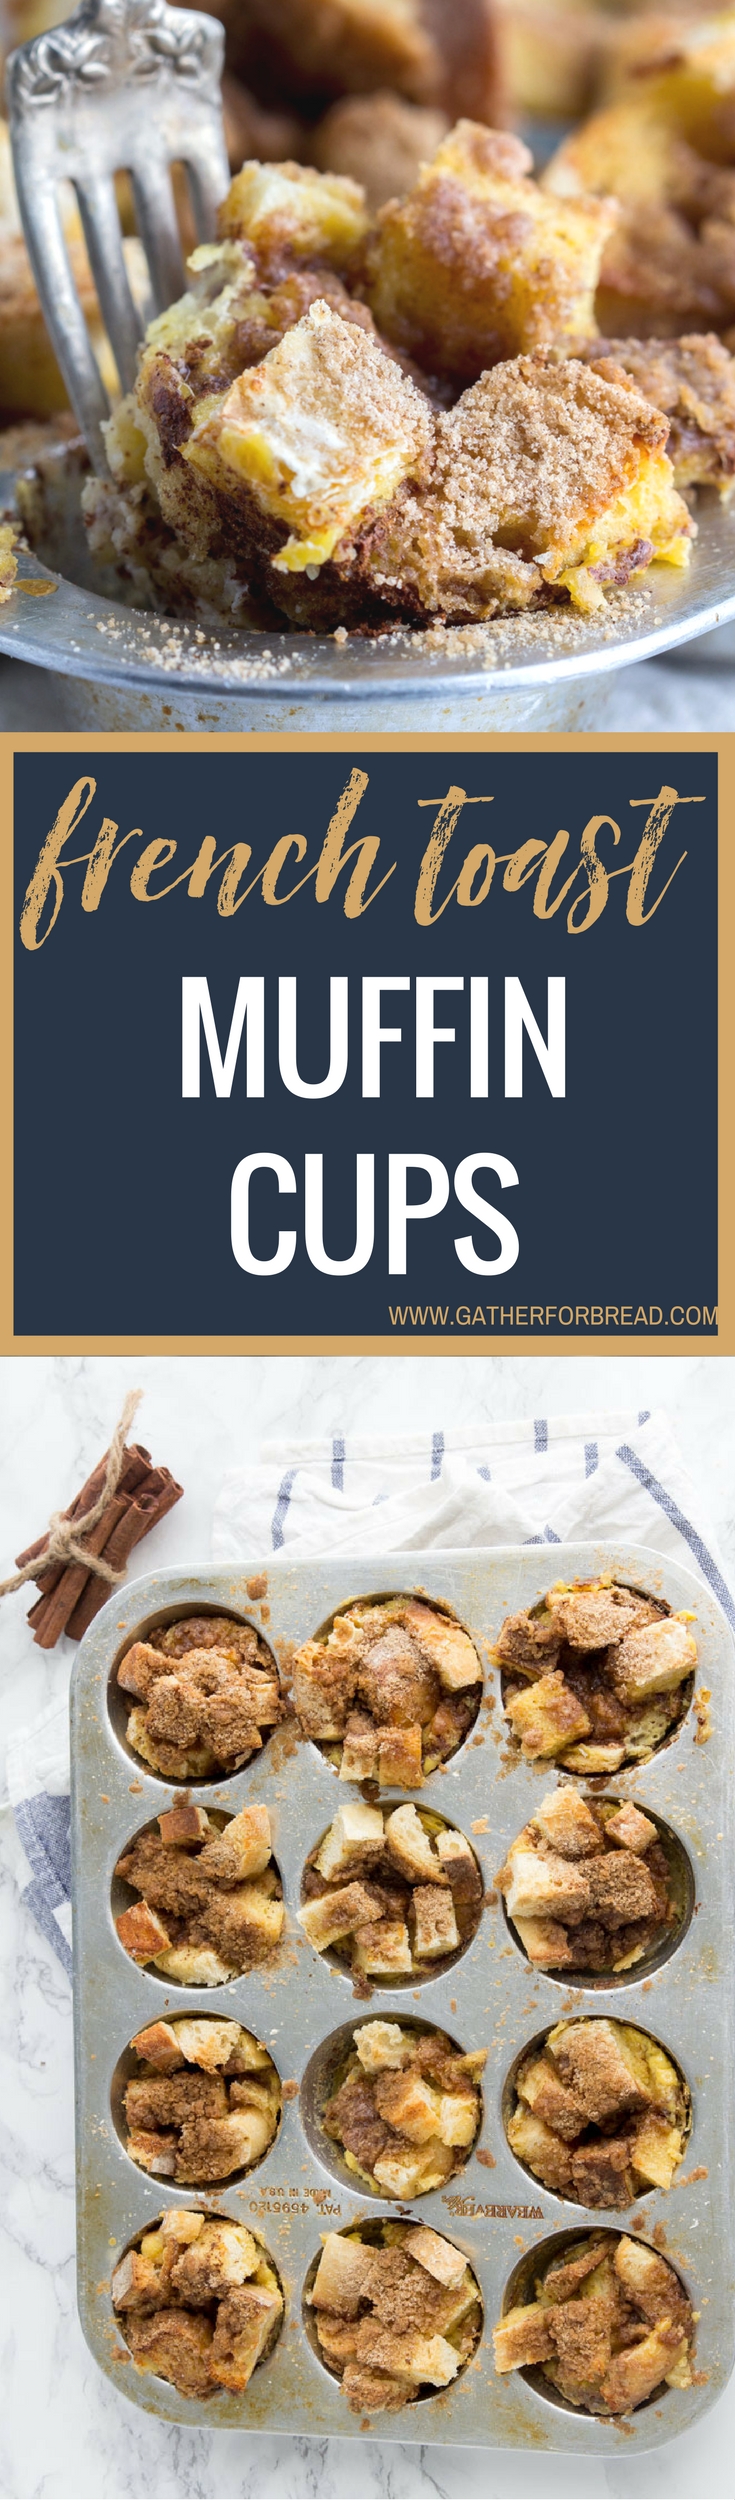 French Toast Muffin Cups - Popular recipe for Easy French Toast Casserole now in muffin cup form. Bake and grab, perfect for kids, breakfast or brunch favorite.